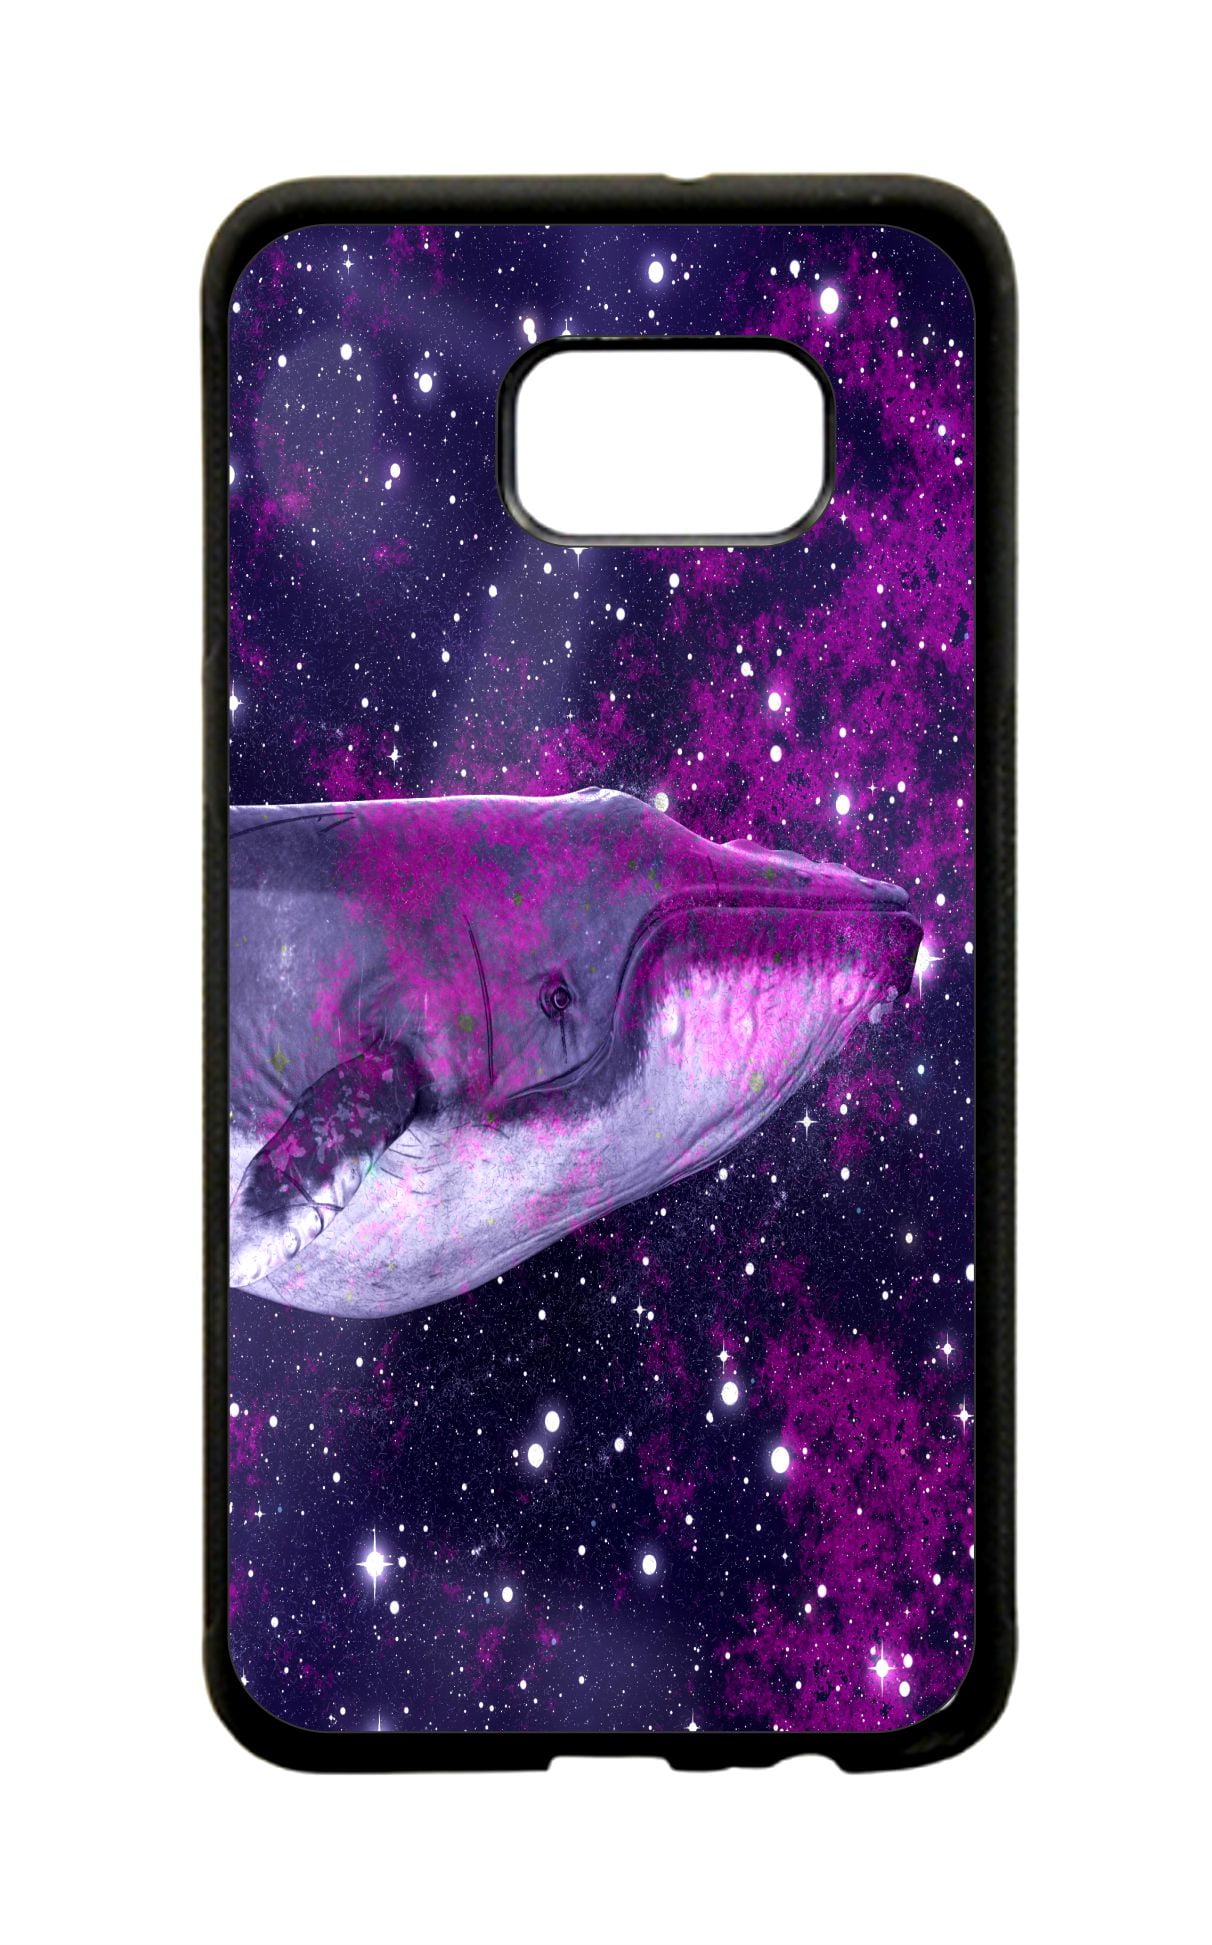 Galactic Purple Whale Design Black Rubber Thin Case Cover for the Samsung  Galaxy s8 - Samsung Galaxy s8 Accessories - s8 Case 